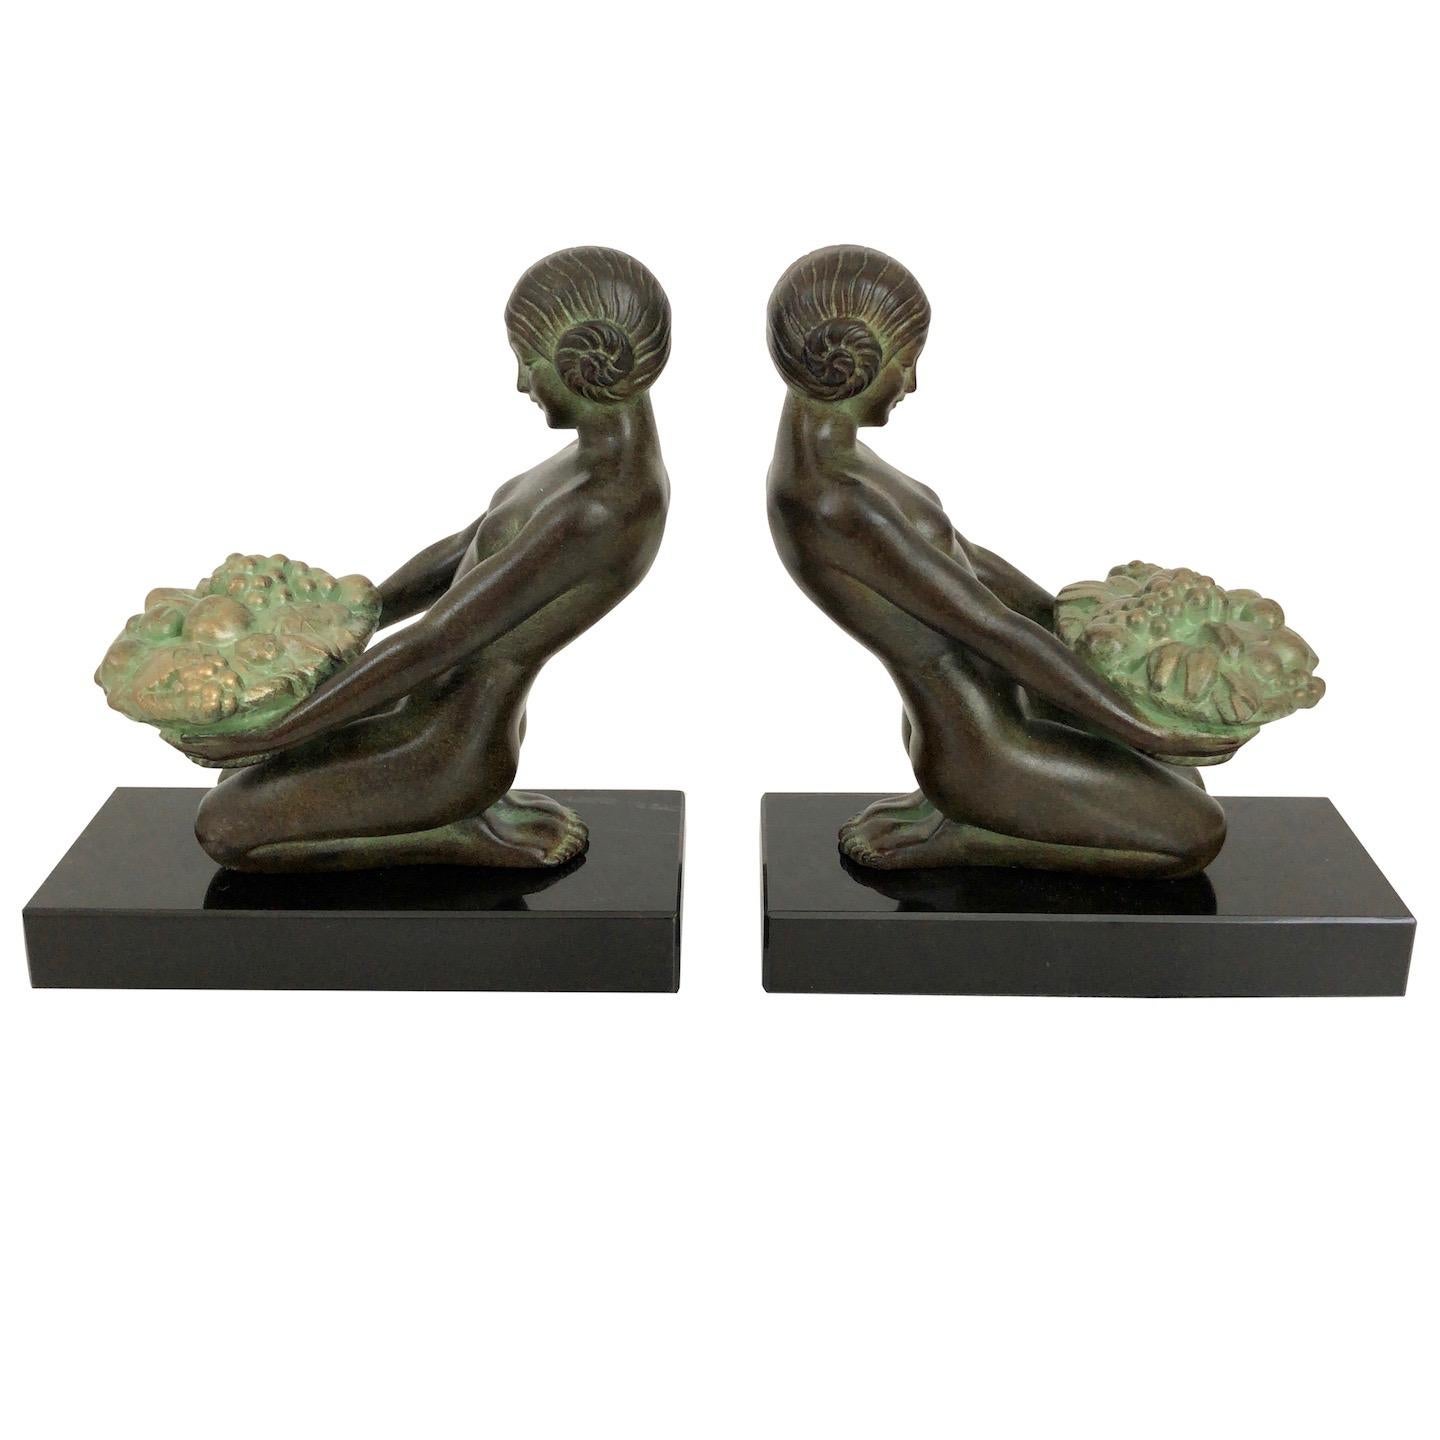 Original Max Le Verrier Cueillette Art Deco Style Bookends in Spelter and Marble In Good Condition For Sale In Ulm, DE